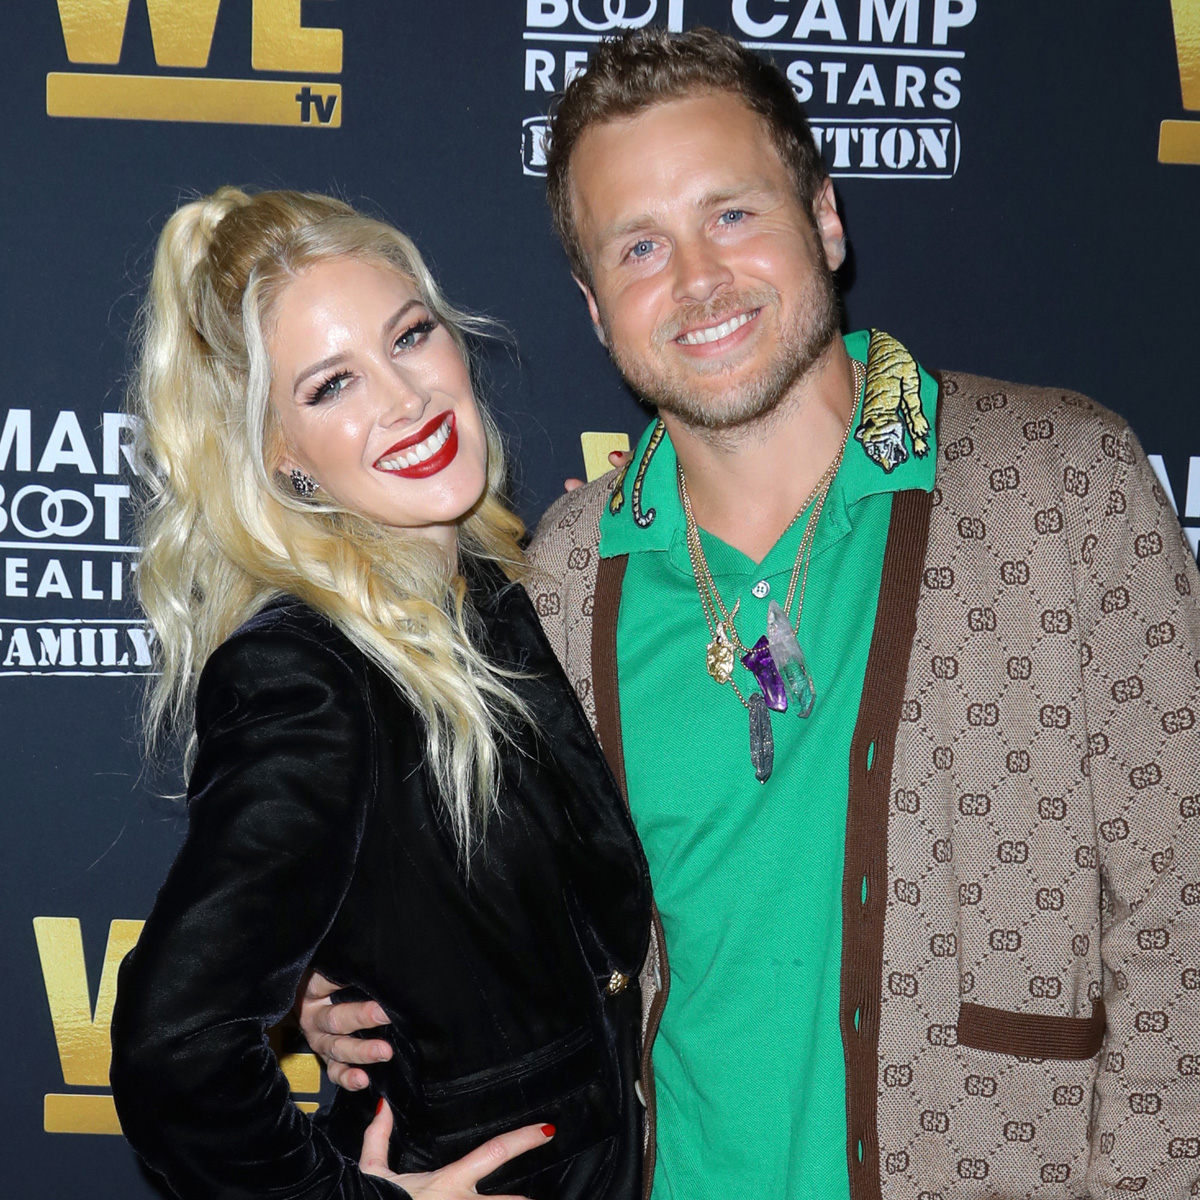 Heidi Montag and Spencer Pratt Reveal Name and Photo of New Baby Boy